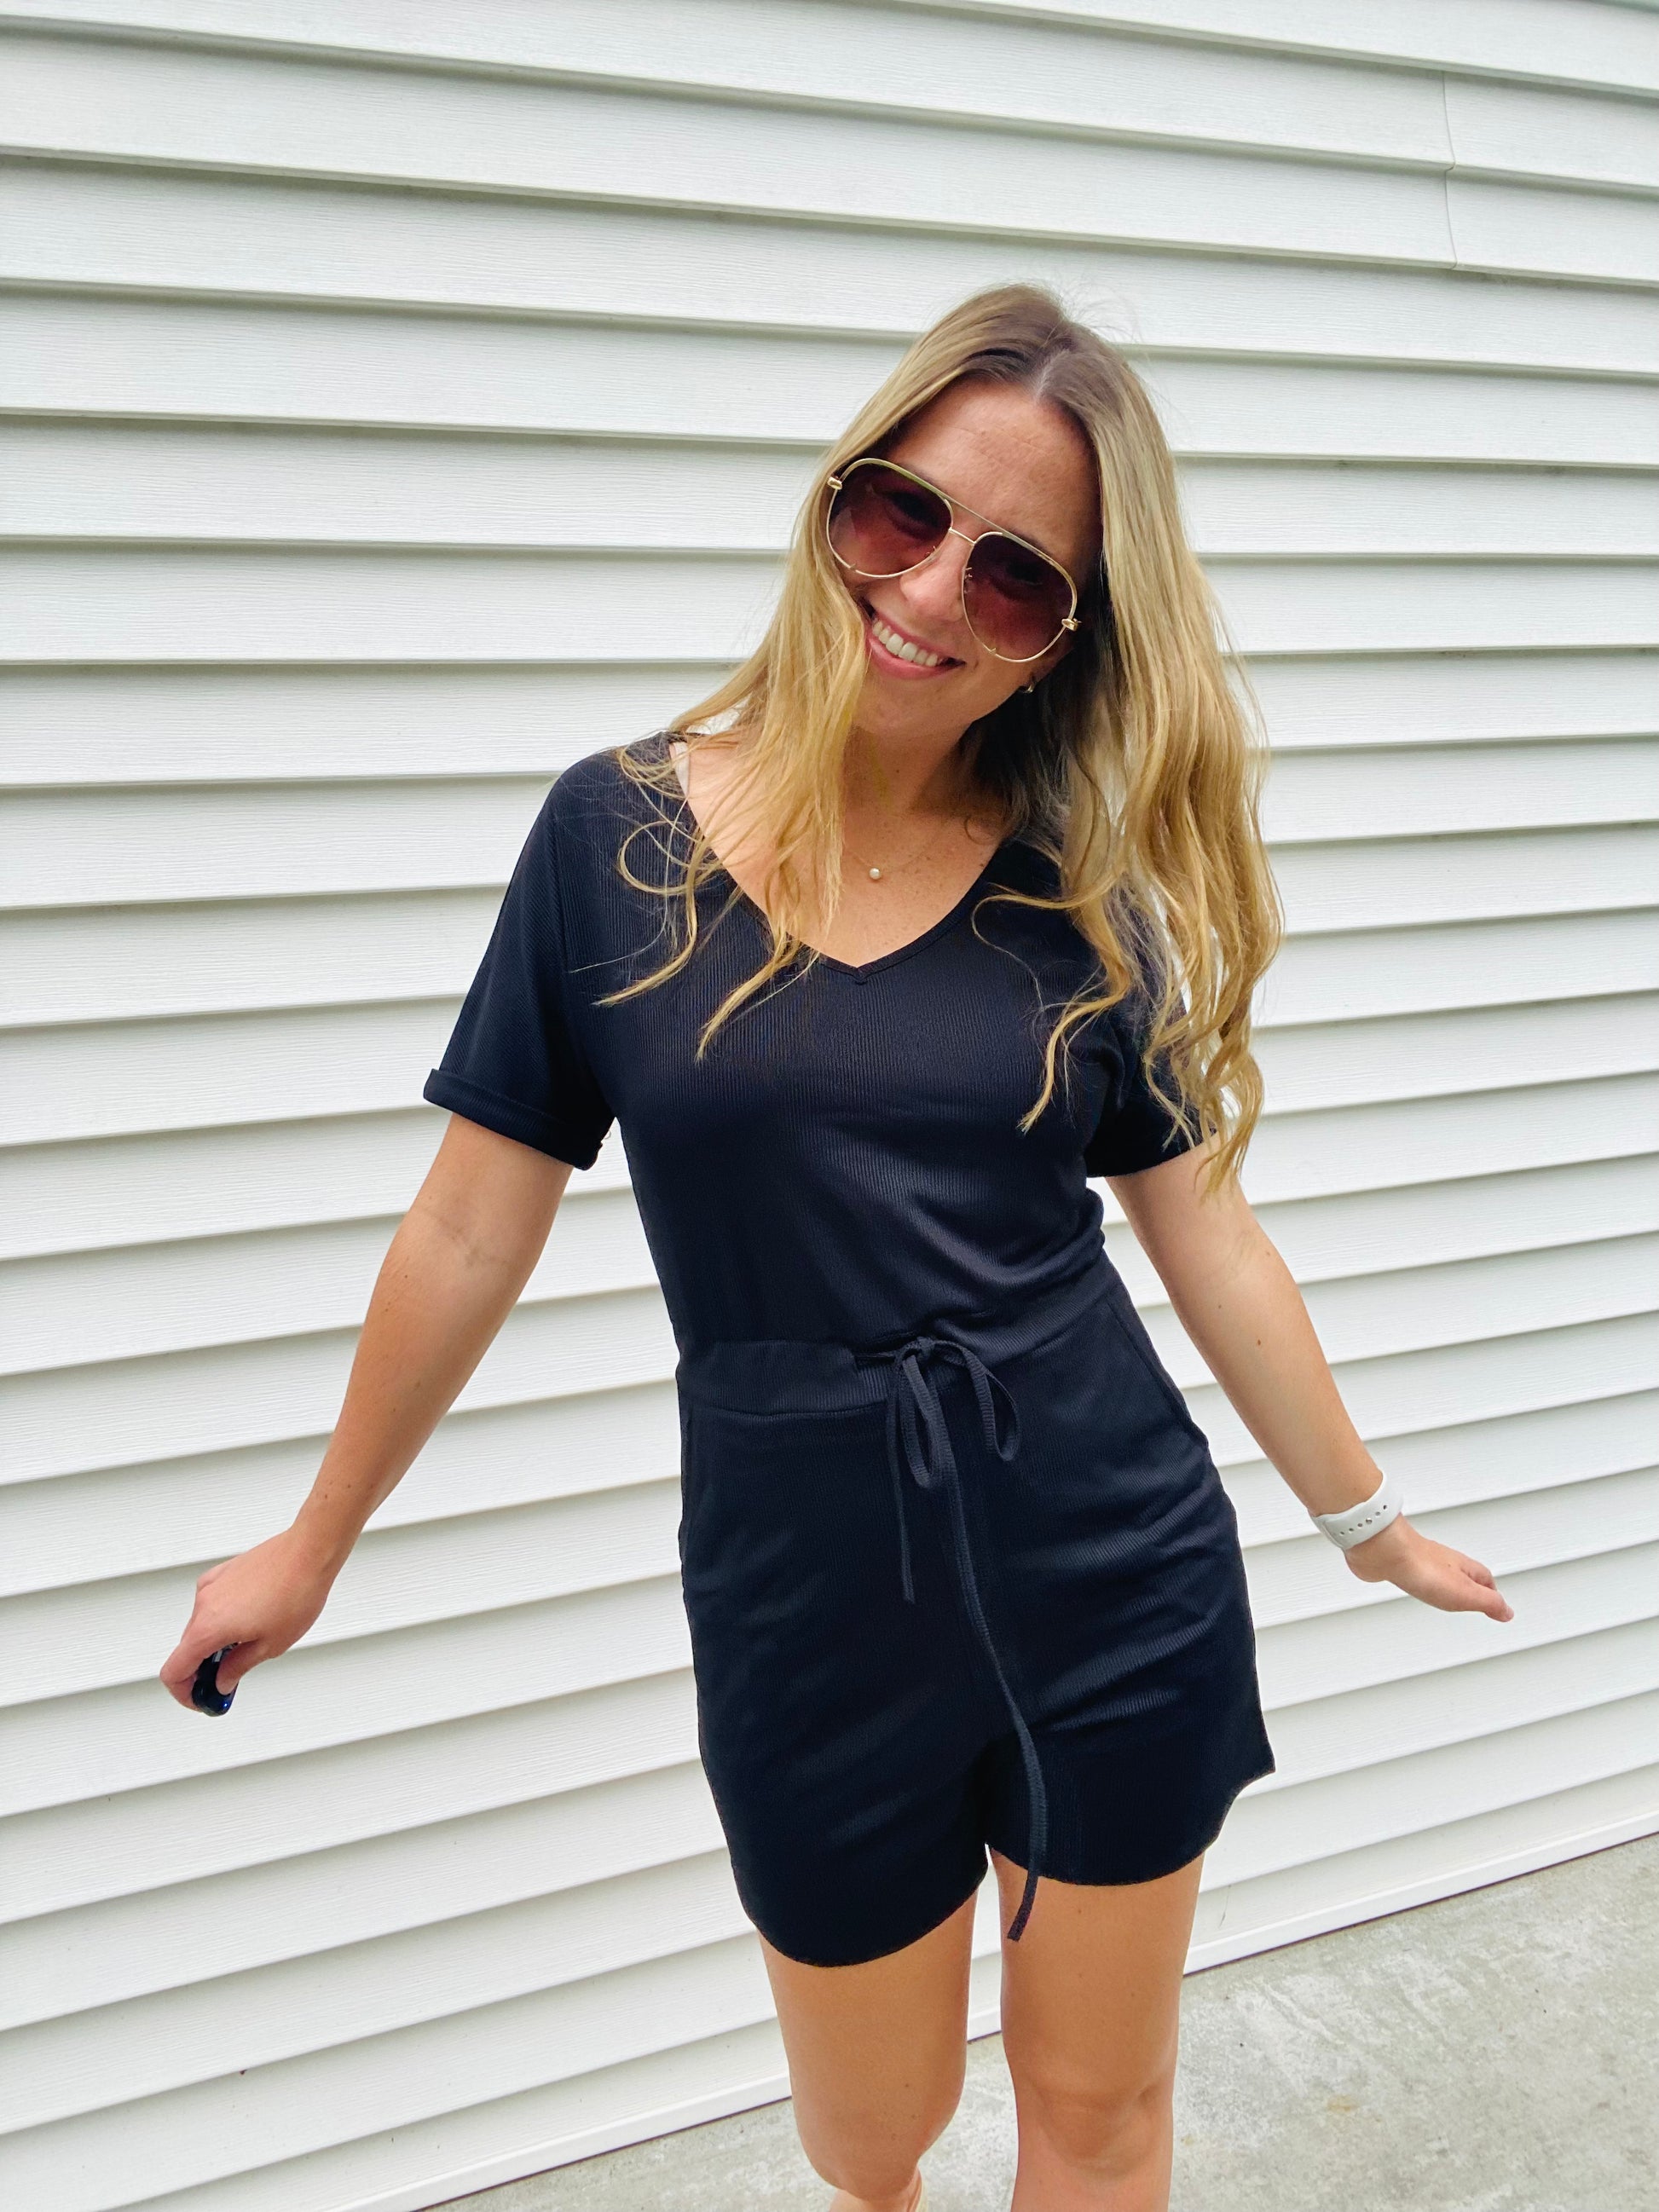 This Black Ribbed Abby Romper offers all-day comfort and style. Made of a lightweight fabric, it features a drawstring waistband, scoop neck neckline, and a casual, cute look. Perfect for pairing with a blazer or jean jacket and sneakers. Enjoy effortless style and comfort.